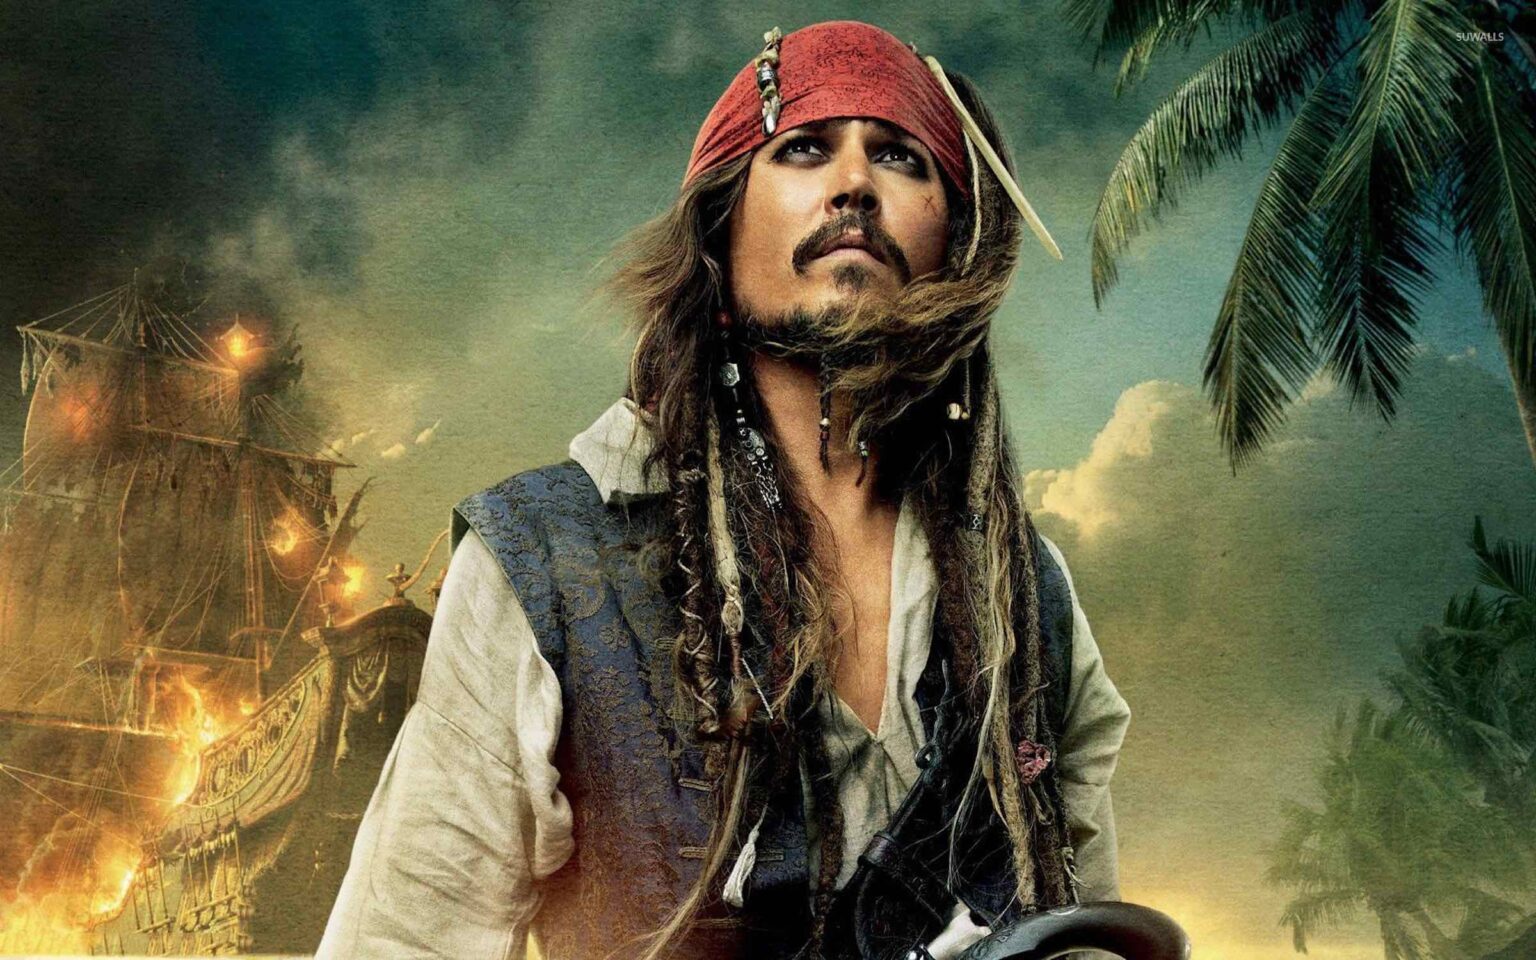 Johnny Depp was dropped from the 'Pirates of the Caribbean' films in 2018 after Amber Heard's claims. Now, Disney is trying to get Depp back aboard.